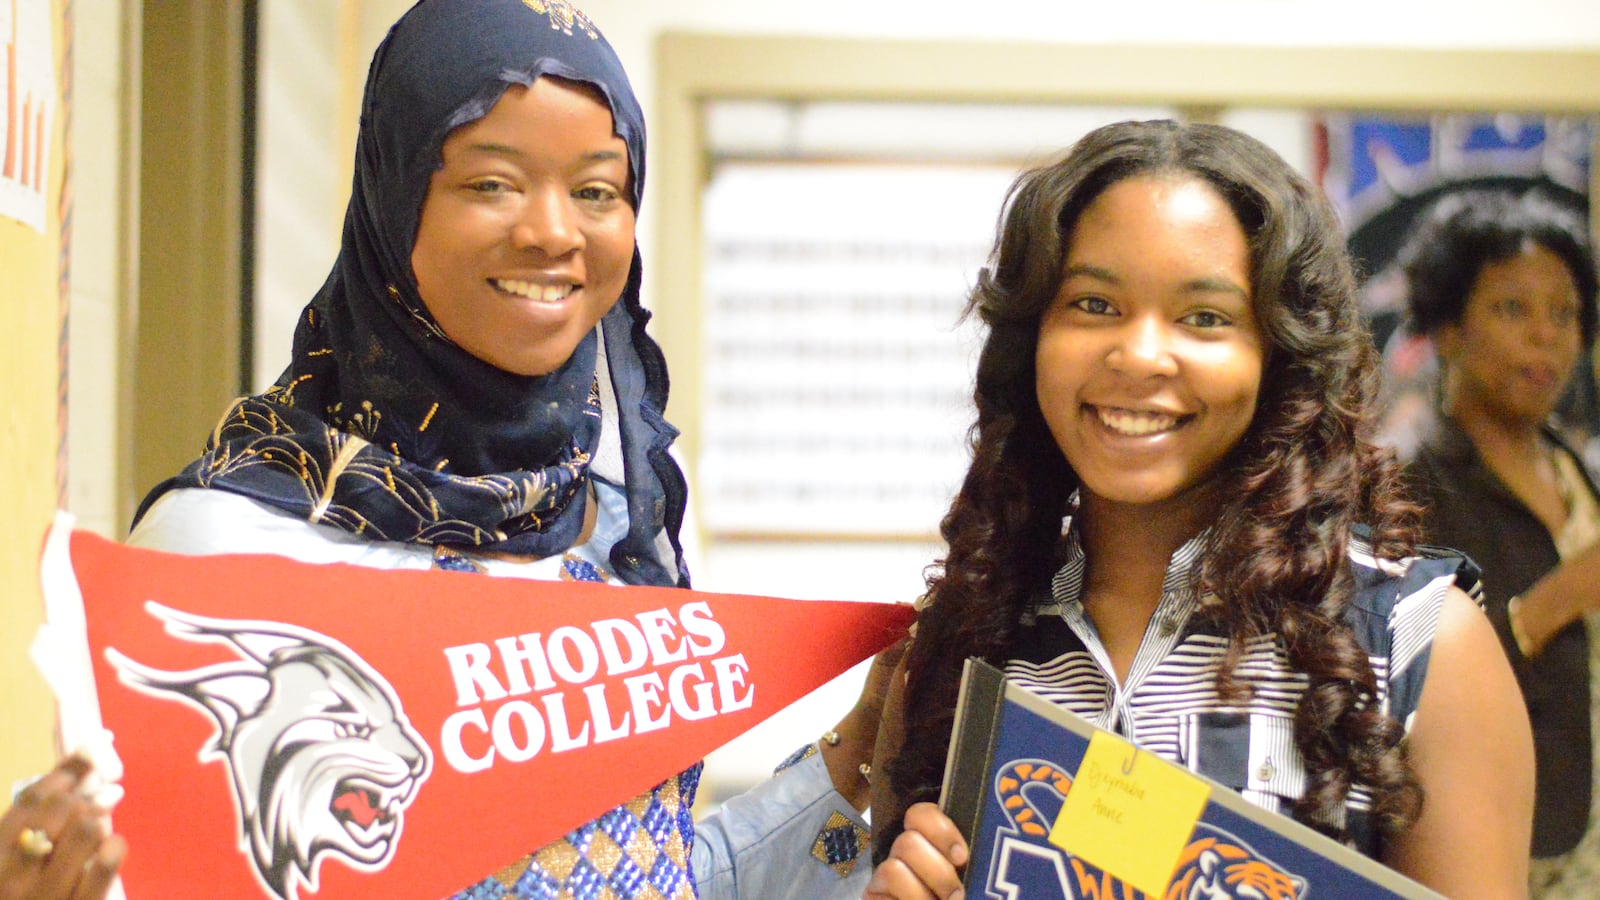 From left: Fatimata Deme and Djeynaba Anne proudly show off their college choices during Academic Signing Day at Whitehaven High School in Memphis.